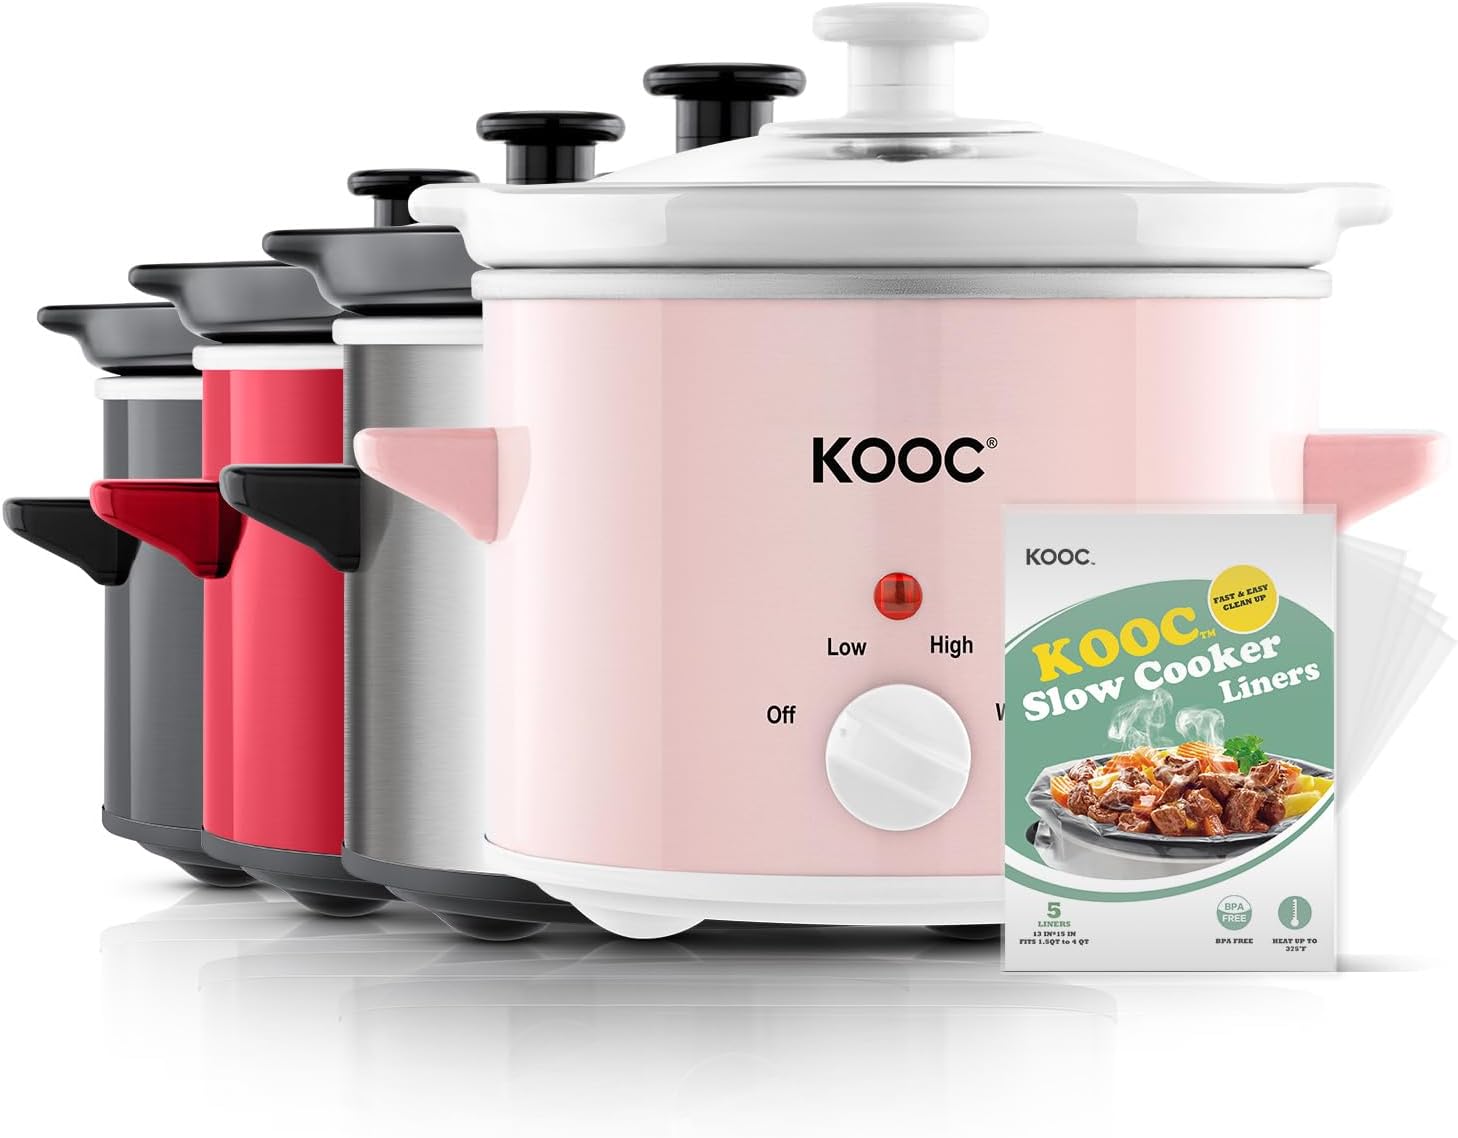 KOOC Small Slow Cooker, 2-Quart, Free Liners Included for Easy Clean-up, Upgraded Ceramic pot, Adjustable Temp, Nutrient Loss Reduction, Stainless Steel, Pink, Round